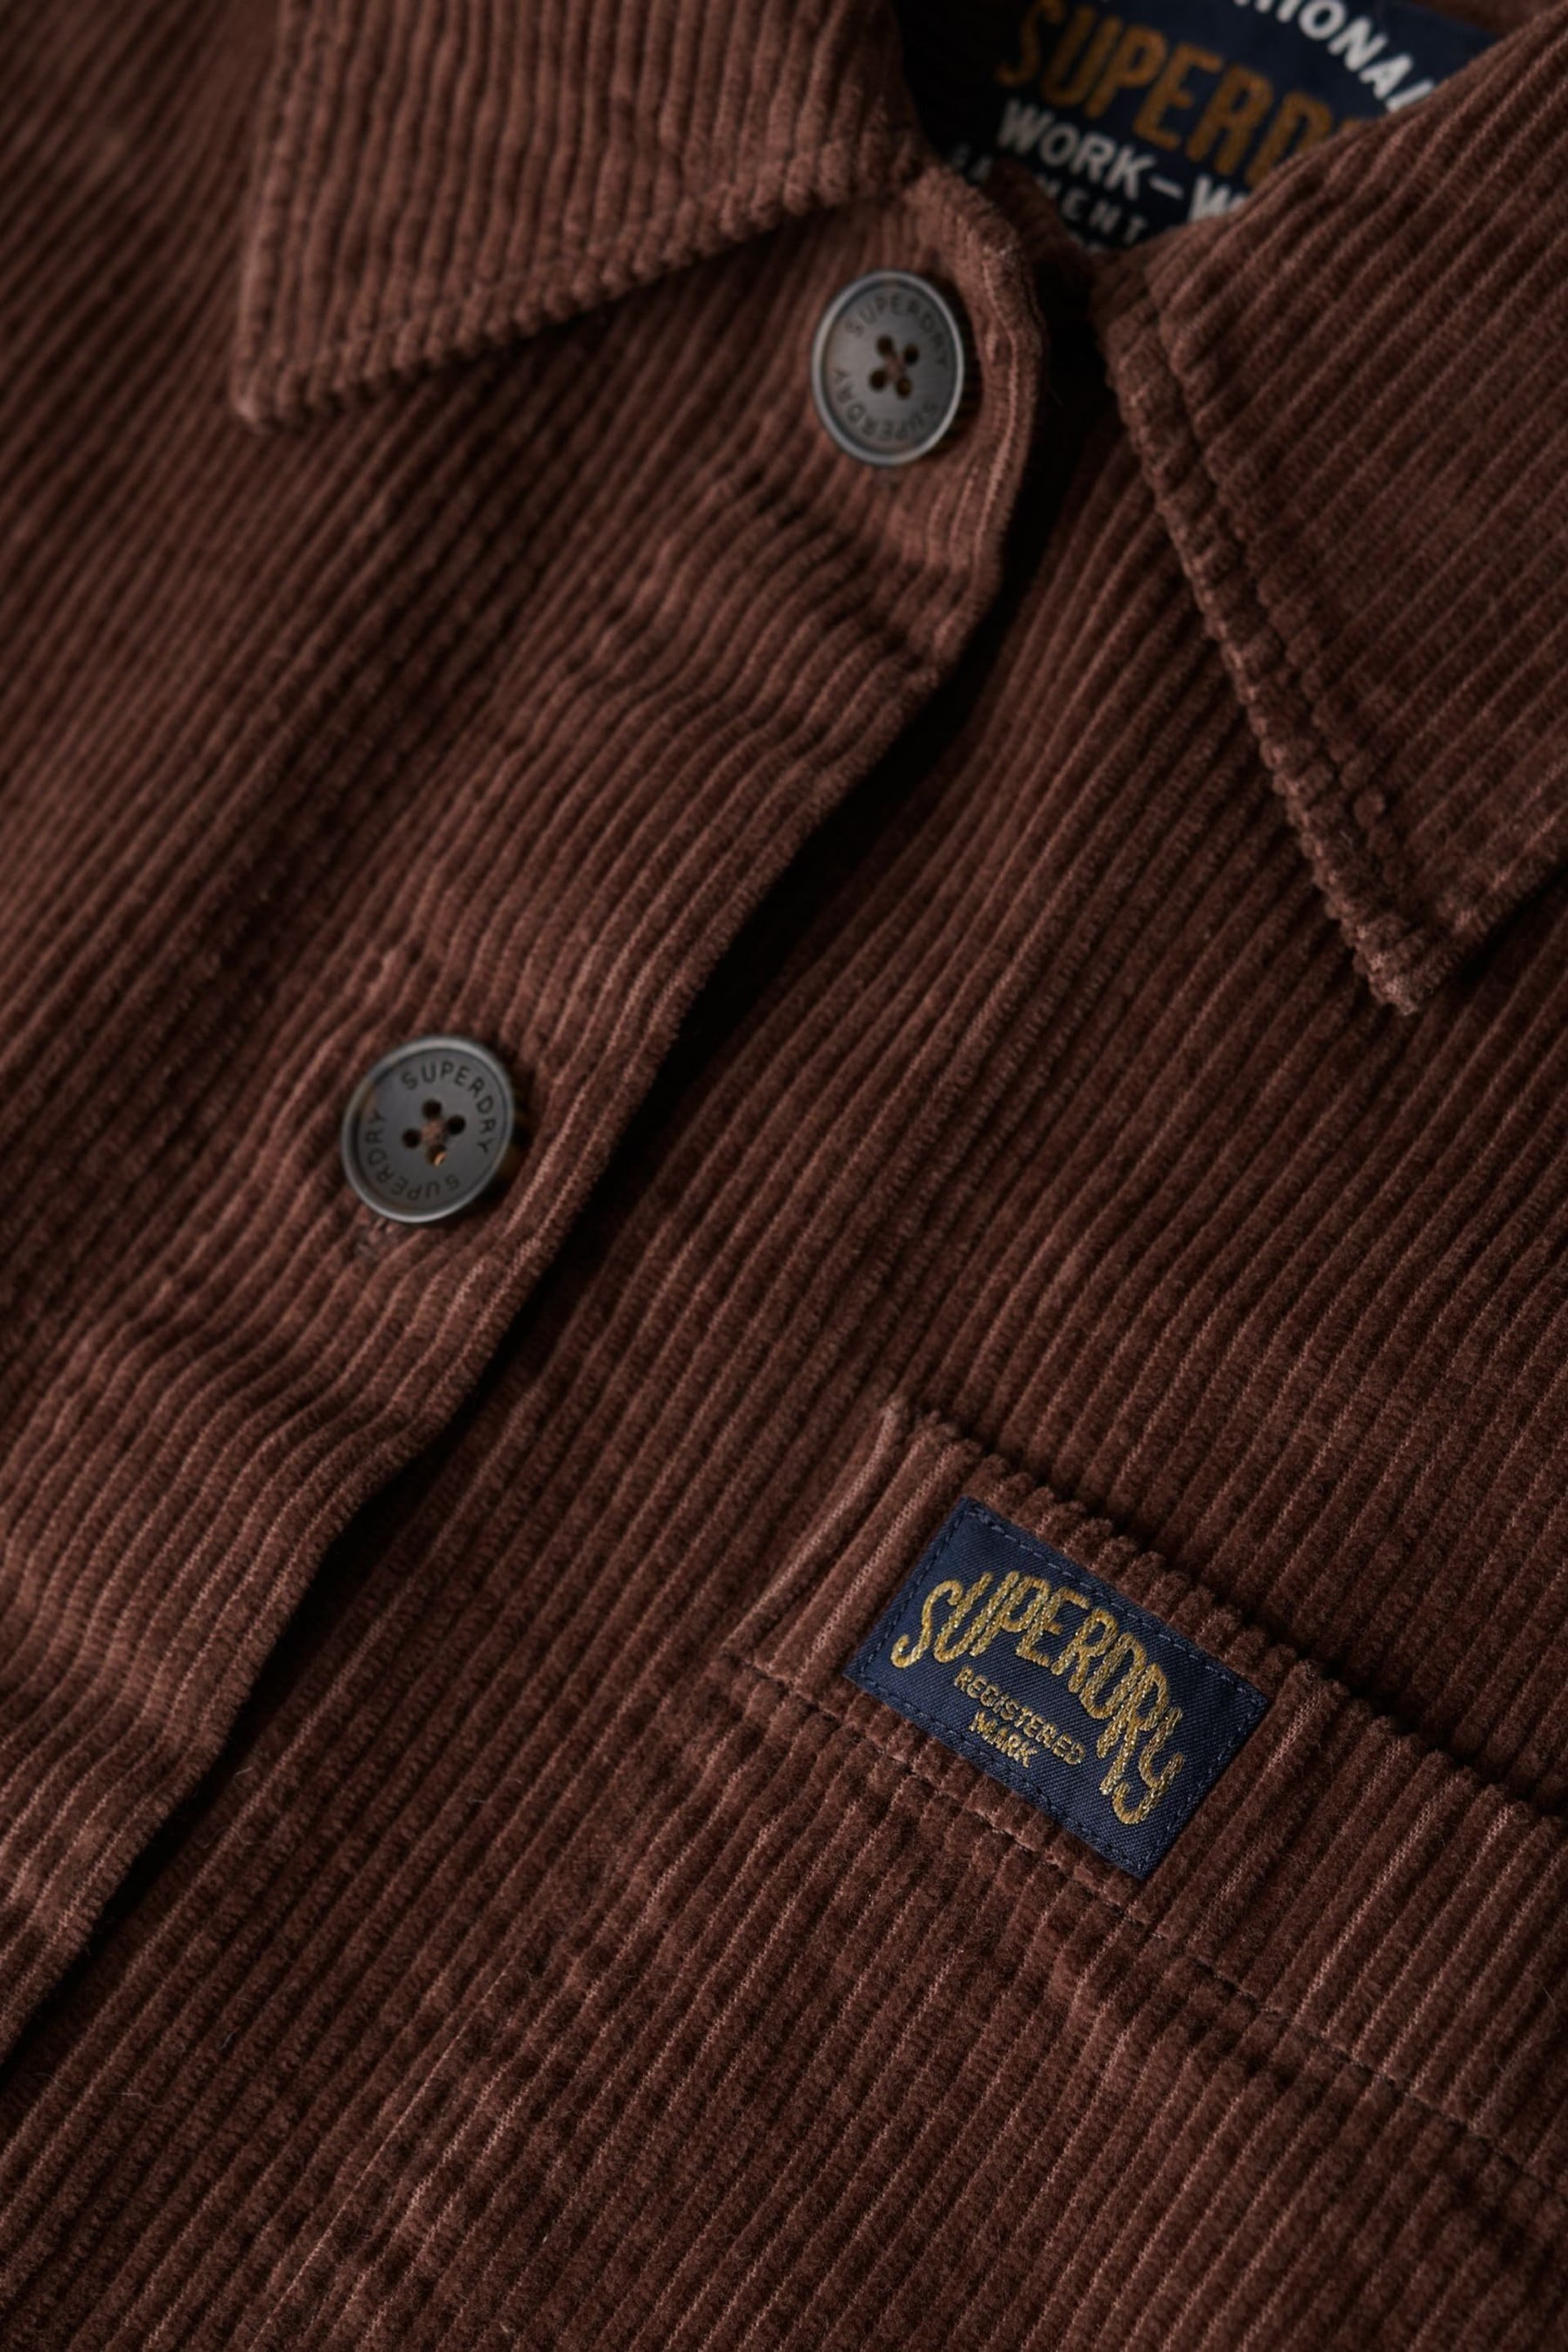 Superdry Brown Chunky Cord Overshirt Jacket - Image 6 of 6